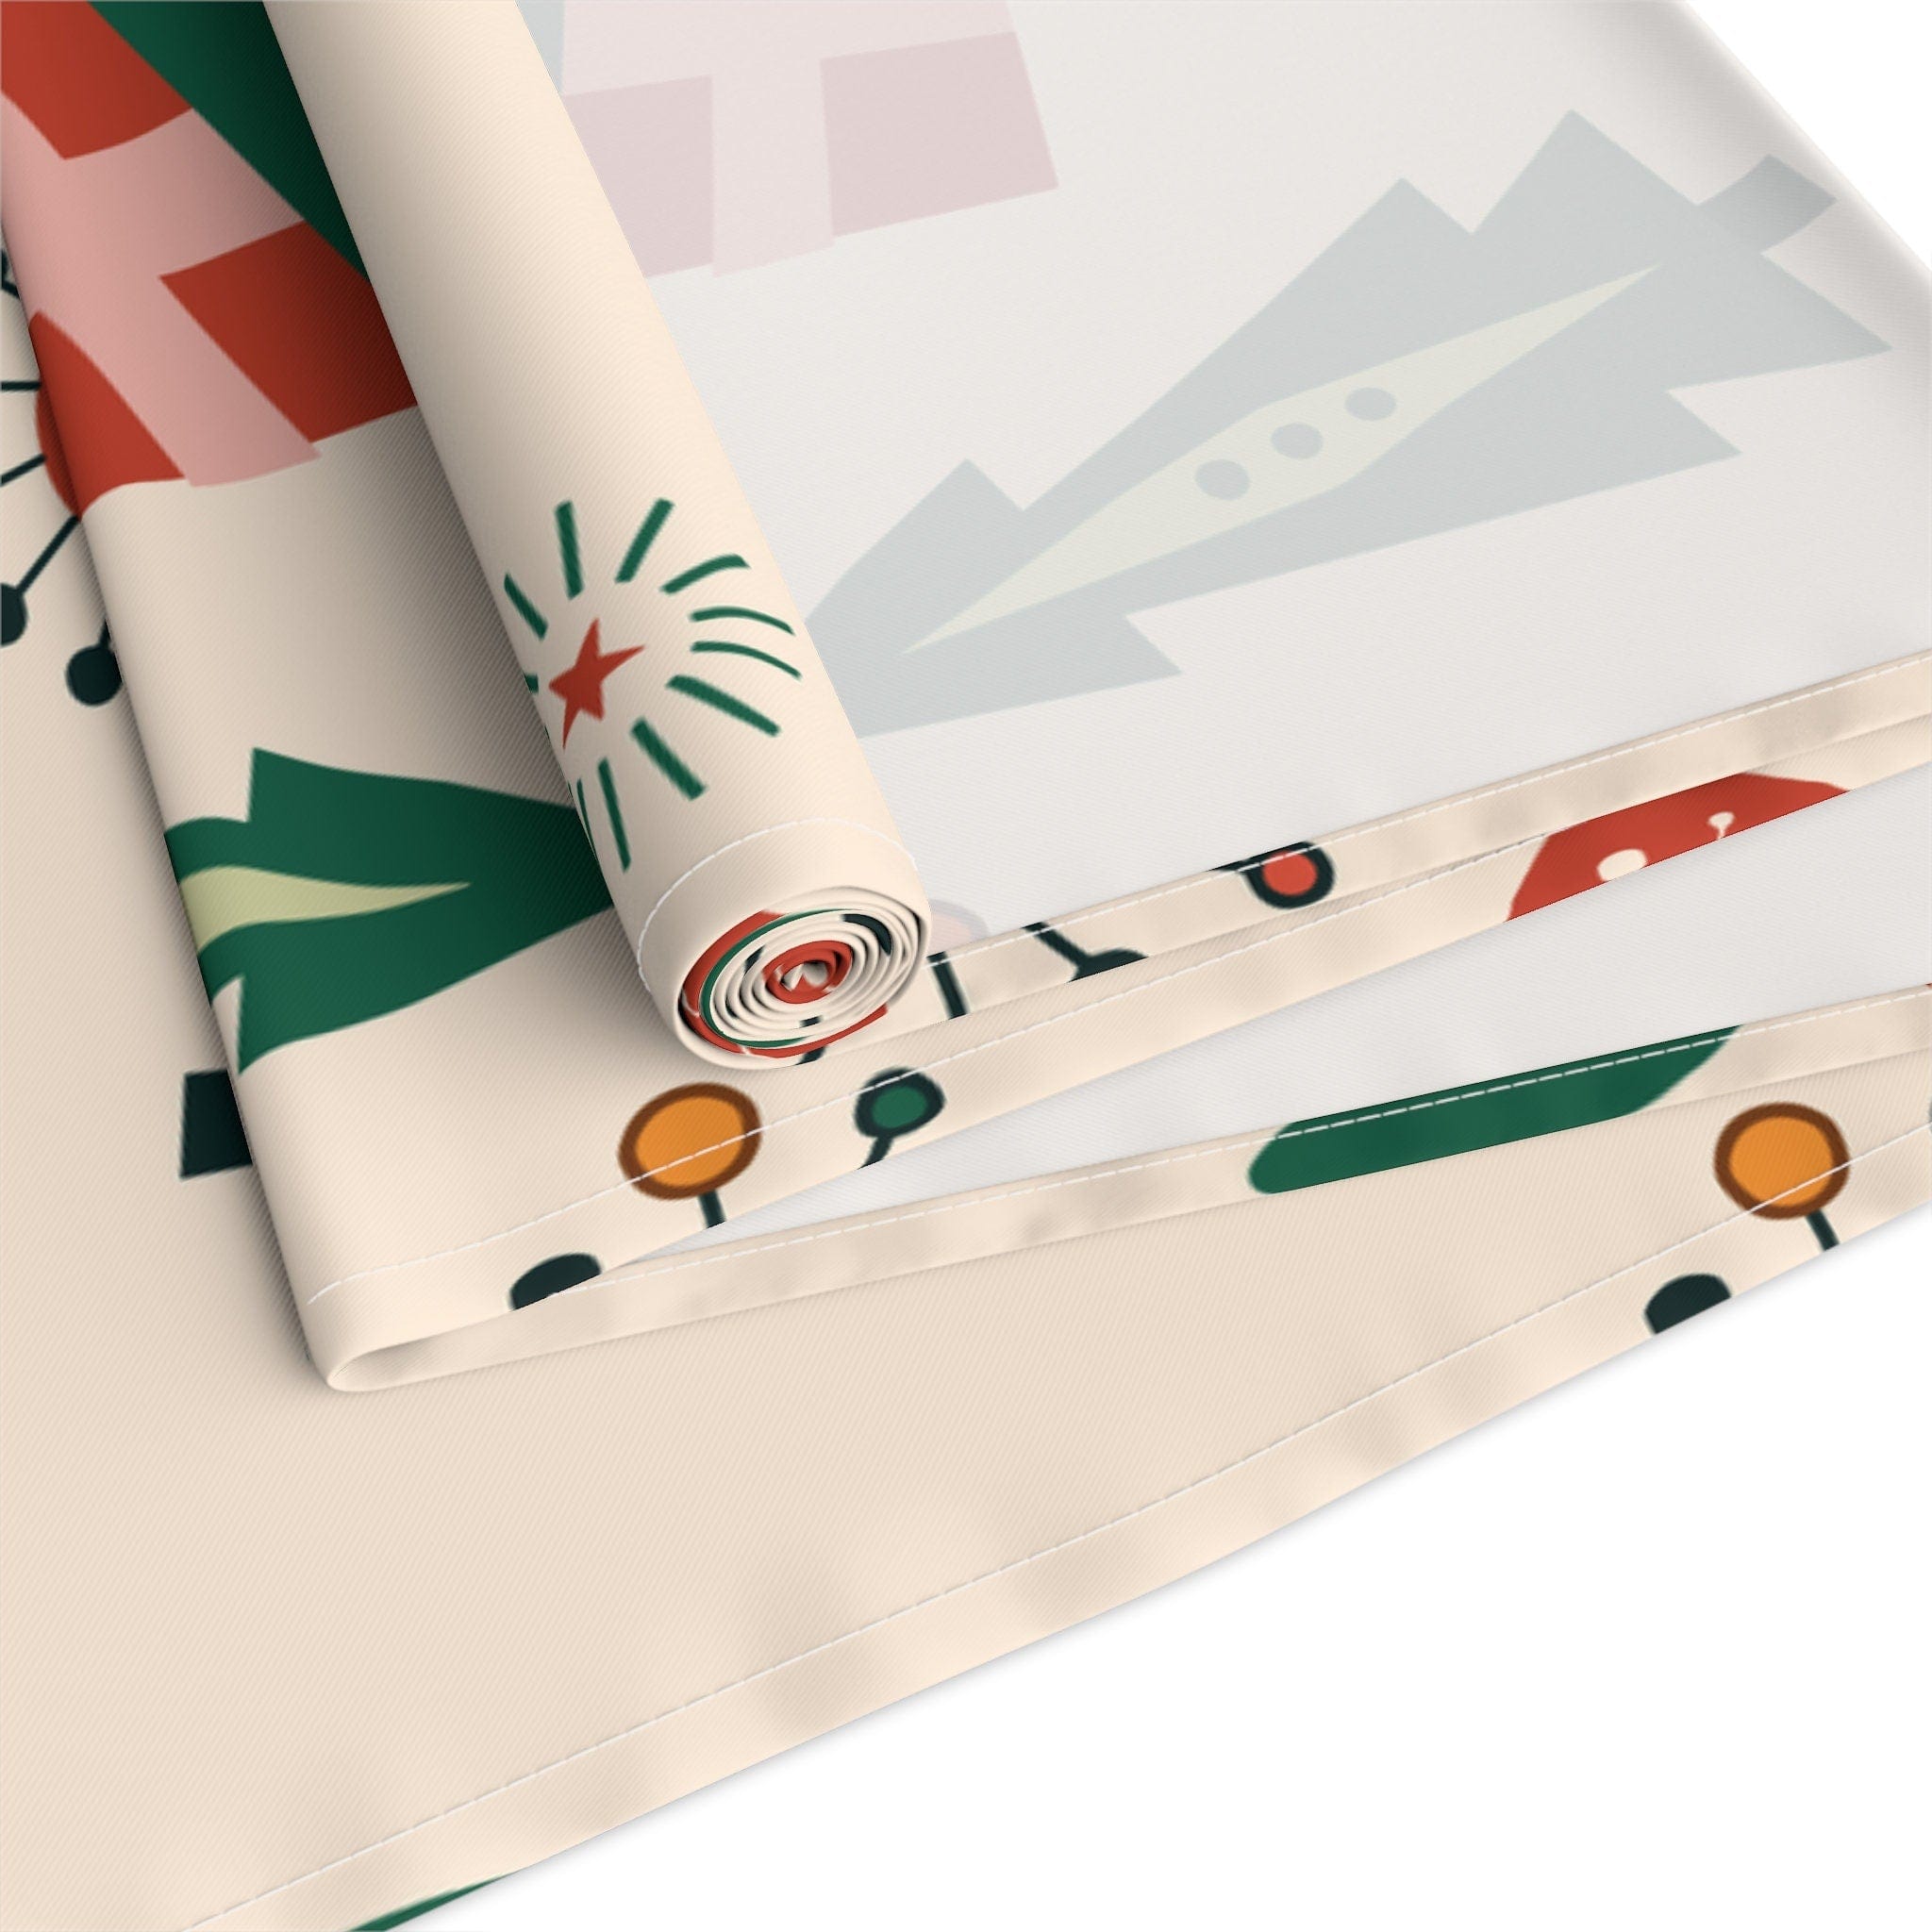 Kate McEnroe New York Mid Century Modern Atomic Kitschy Cat Christmas Table Runner, 50s Vintage Style Holiday DecorTable Runners11229806143697107890